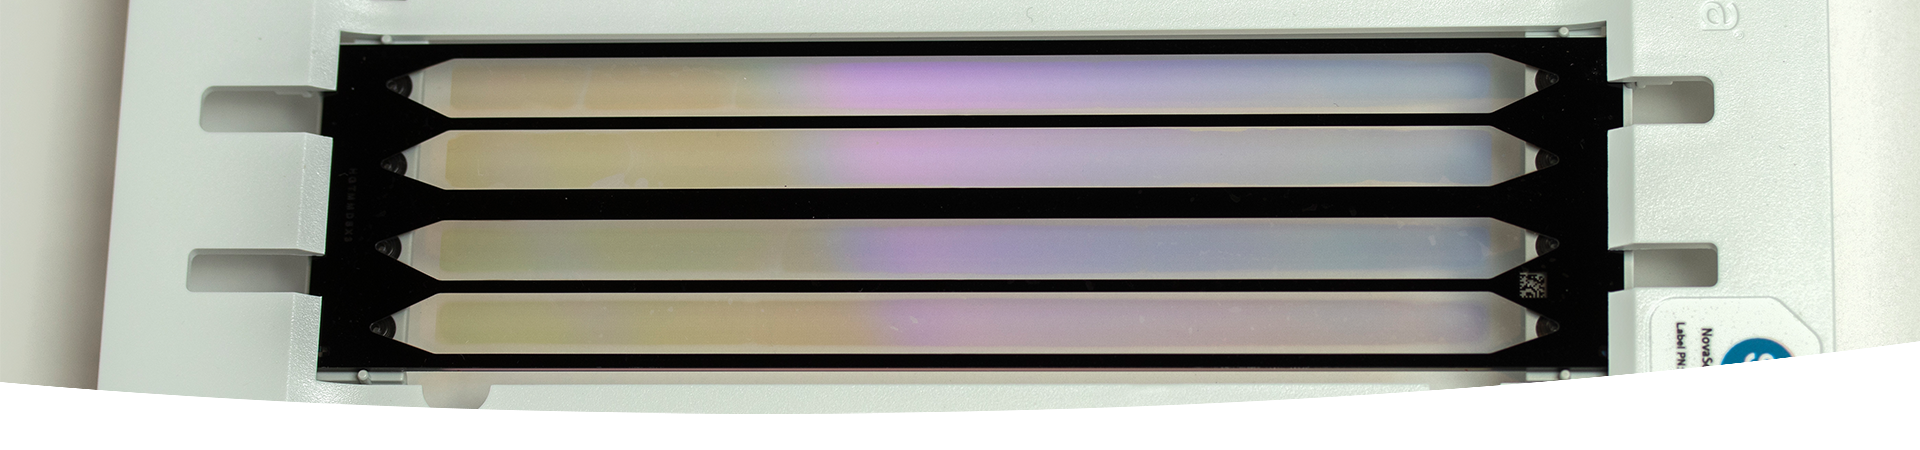 Patterned flow cell technology. A rectangular piece of equipment with tiny wells arranged in an array.